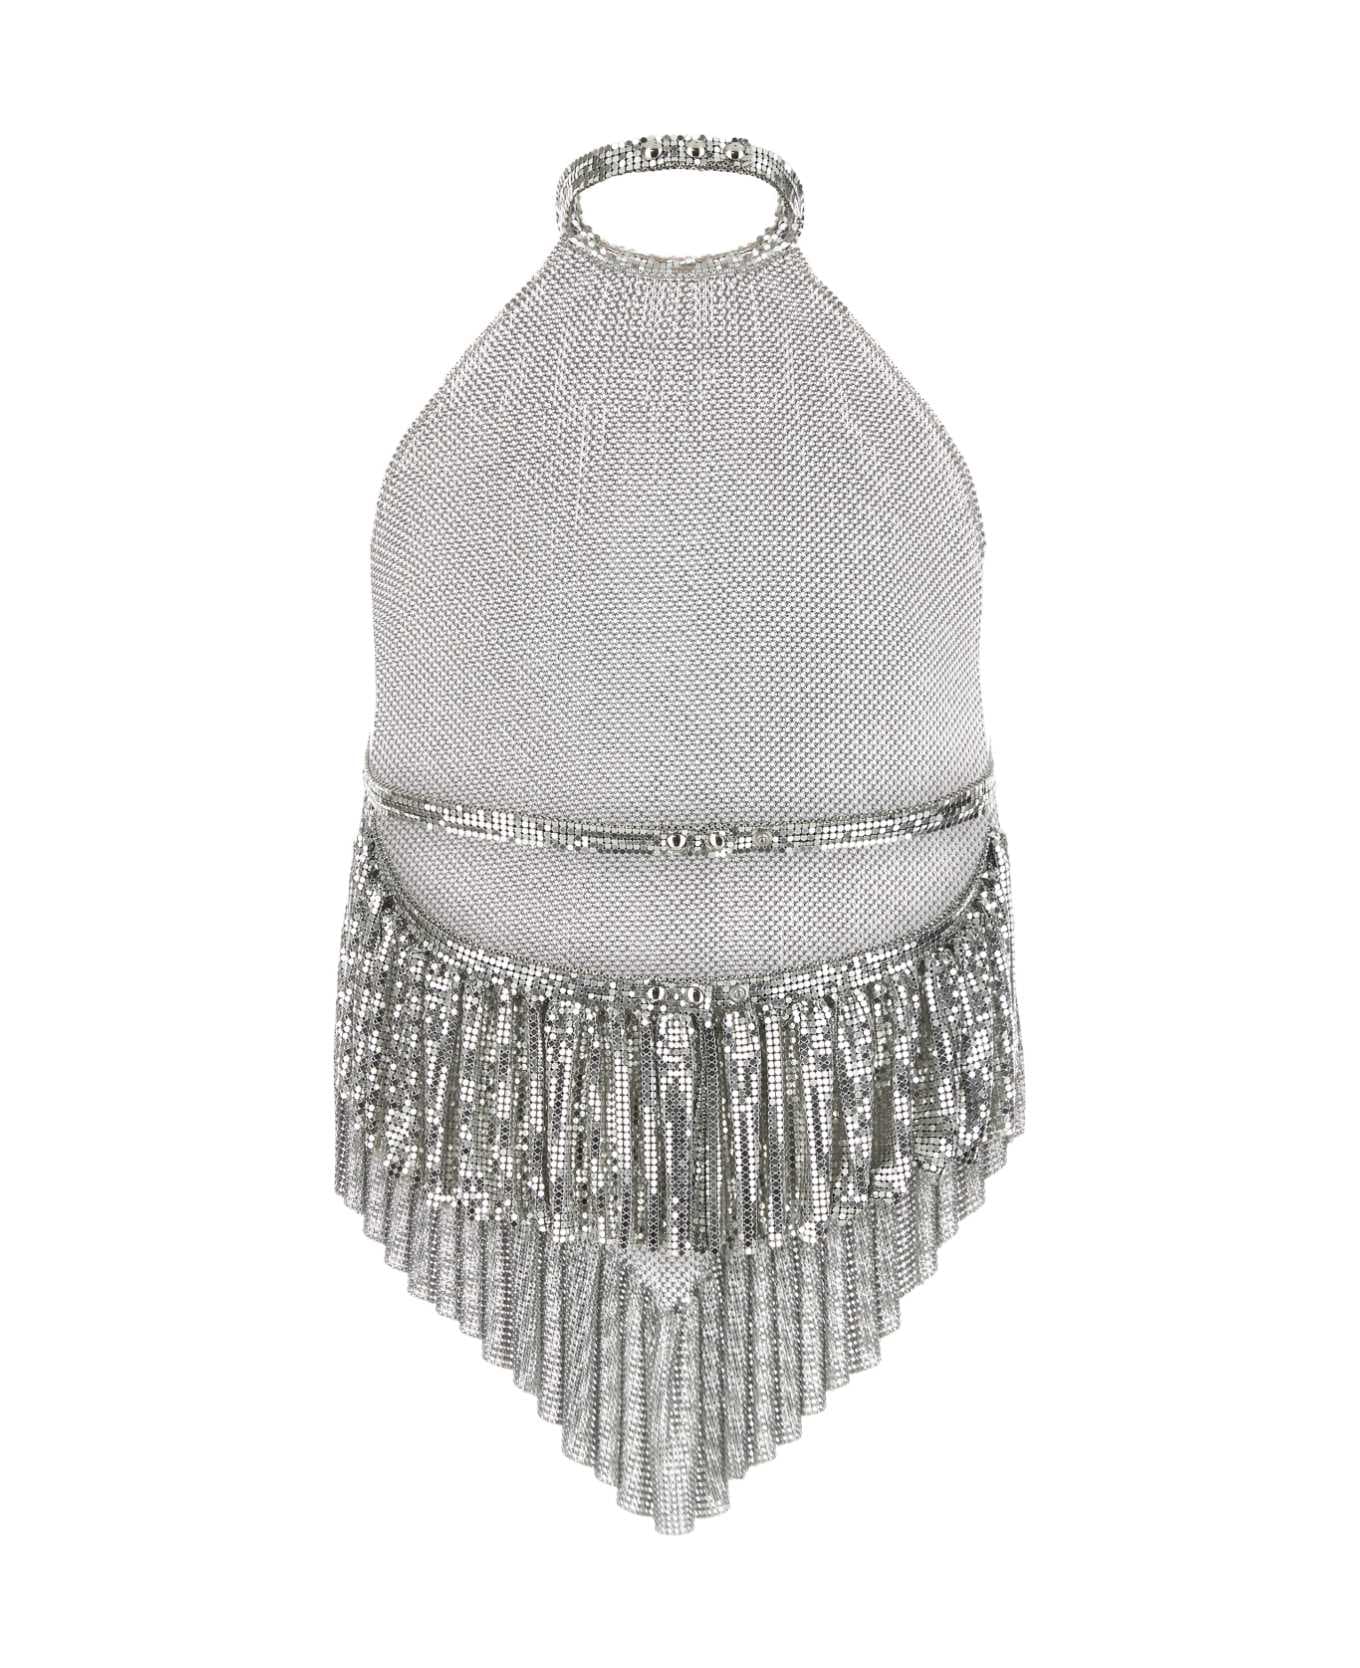 Paco Rabanne Silver Chain Mail Top - SILVER